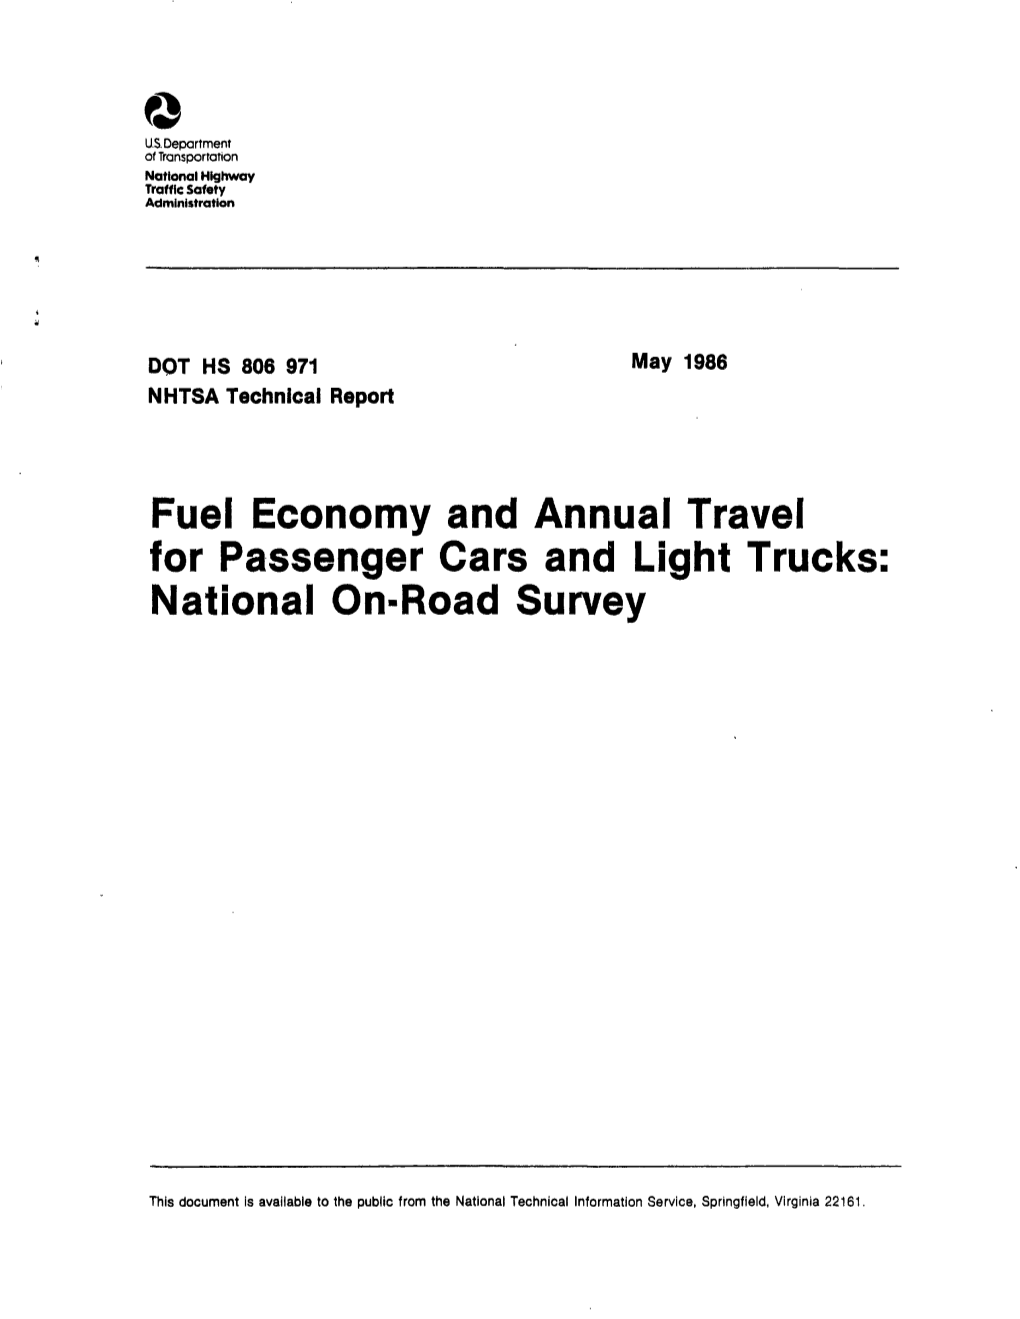 Fuel Economy and Annual Travel for Passenger Cars and Light Trucks: National On-Road Survey